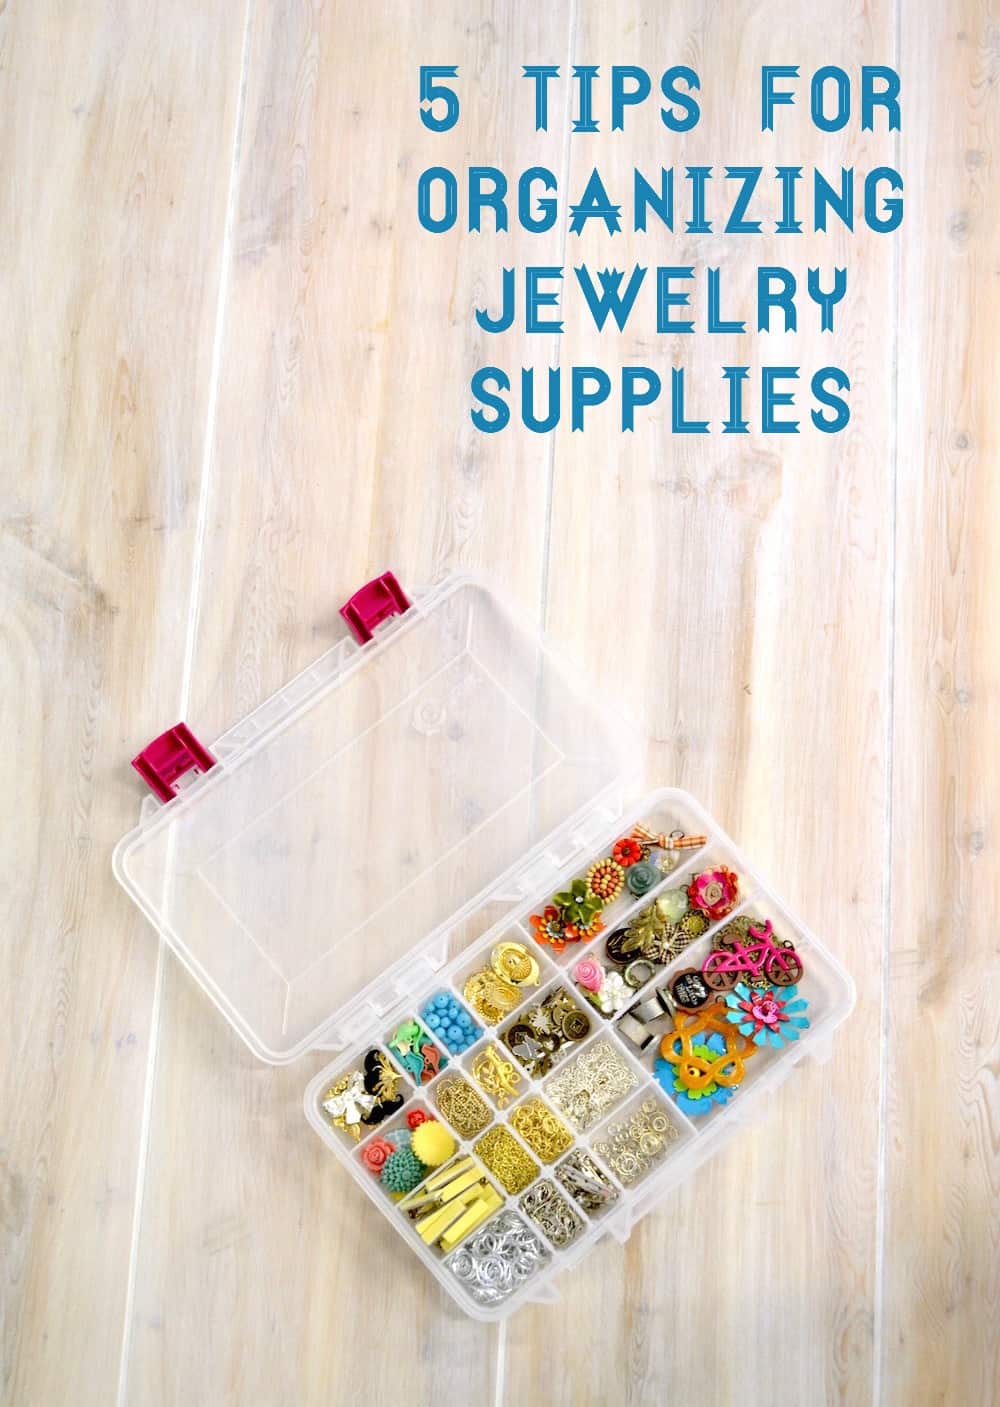 5 Tips for Jewelry Making and Beading - Best Craft Organizer